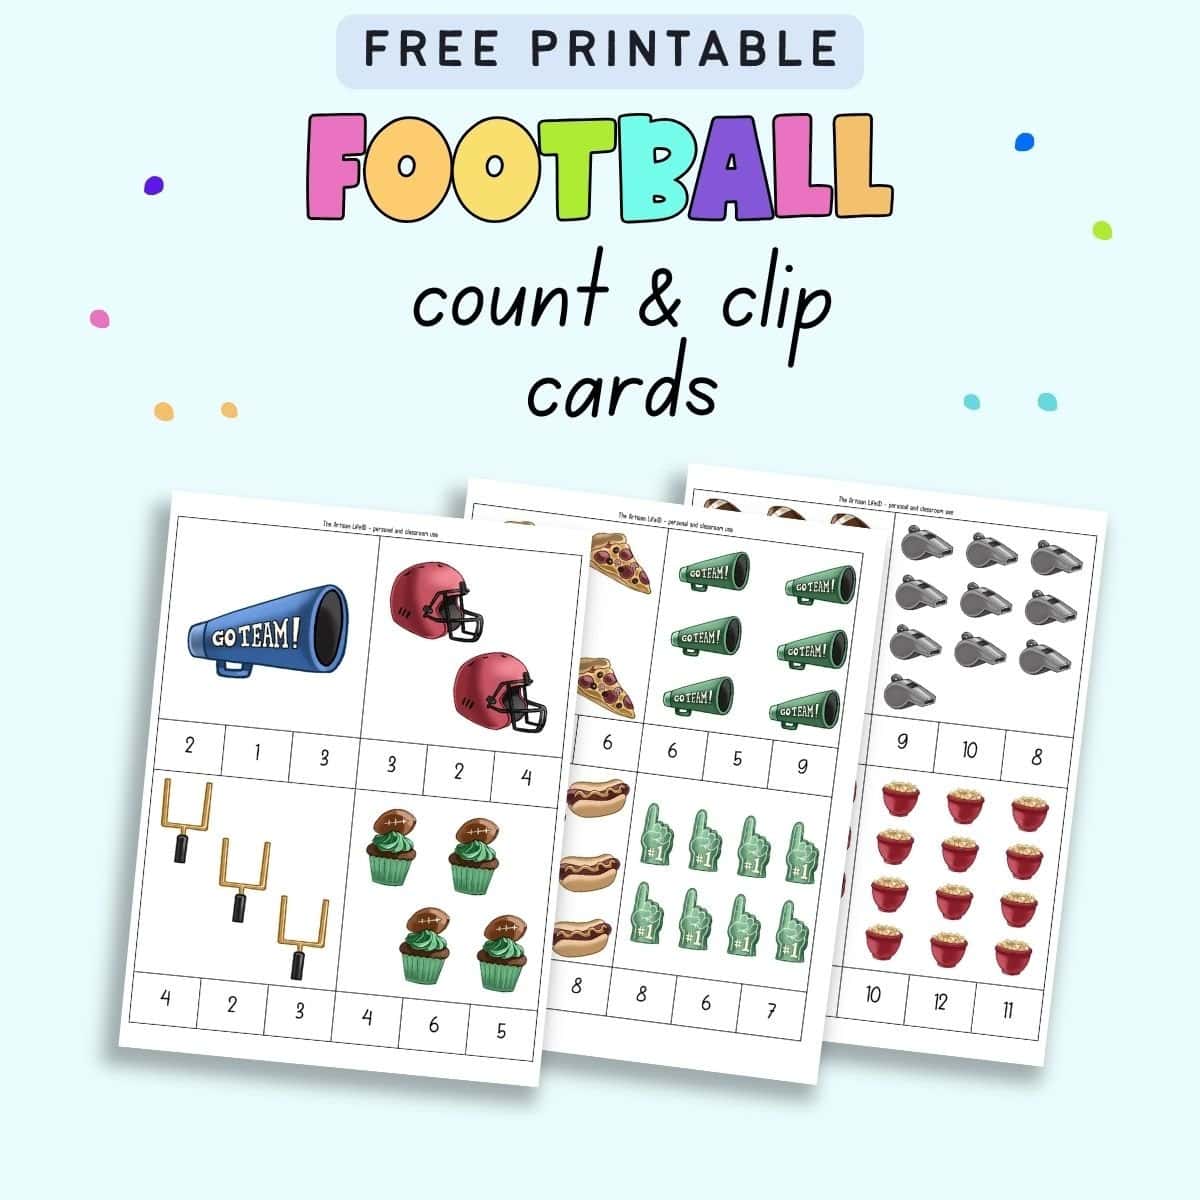 A preview of three sheets of printable count and clip card with a football theme and numbers 1-12